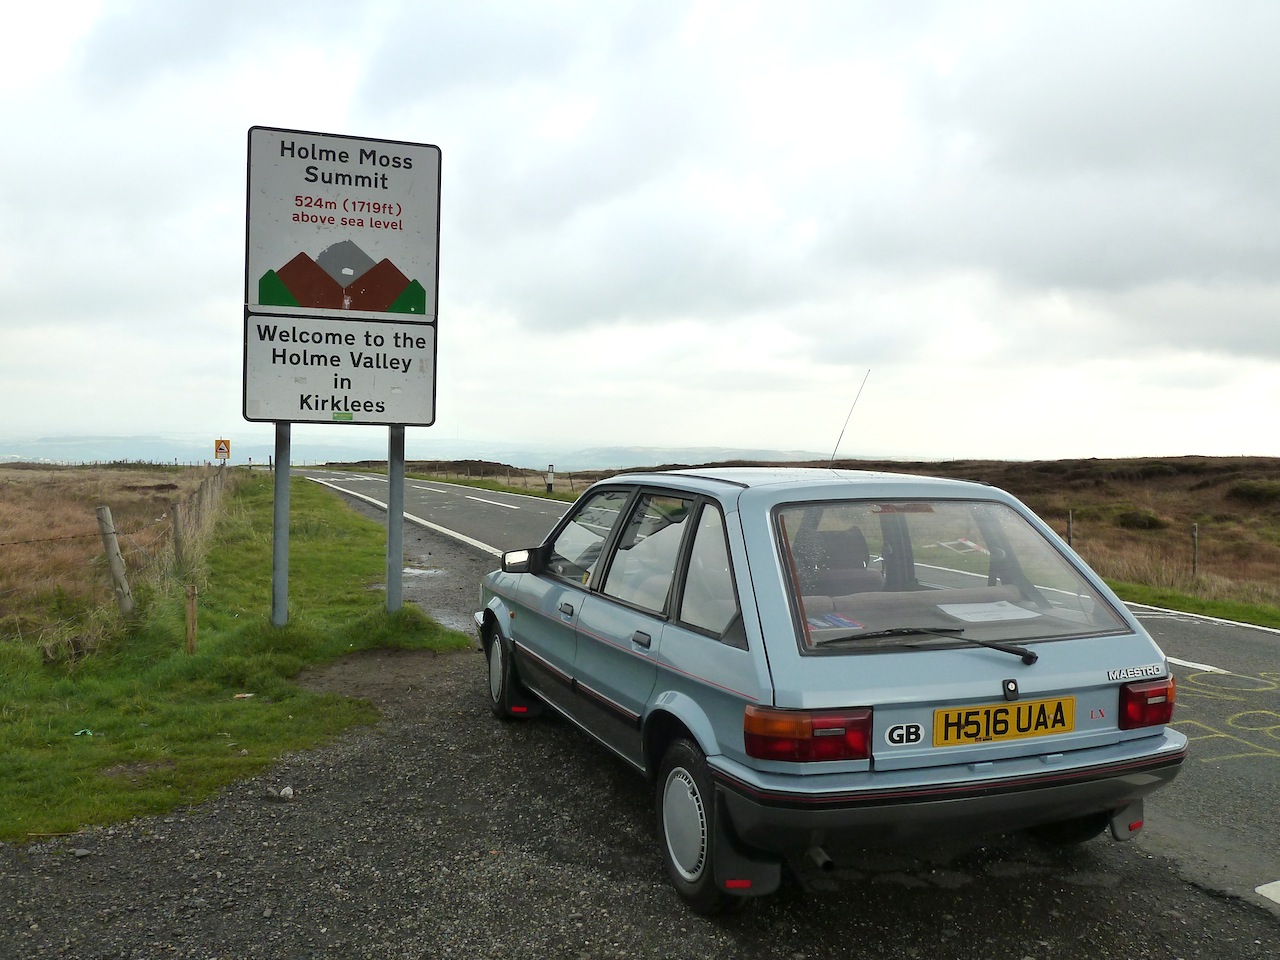 "On Top of The World?" on Holme Moss summit.